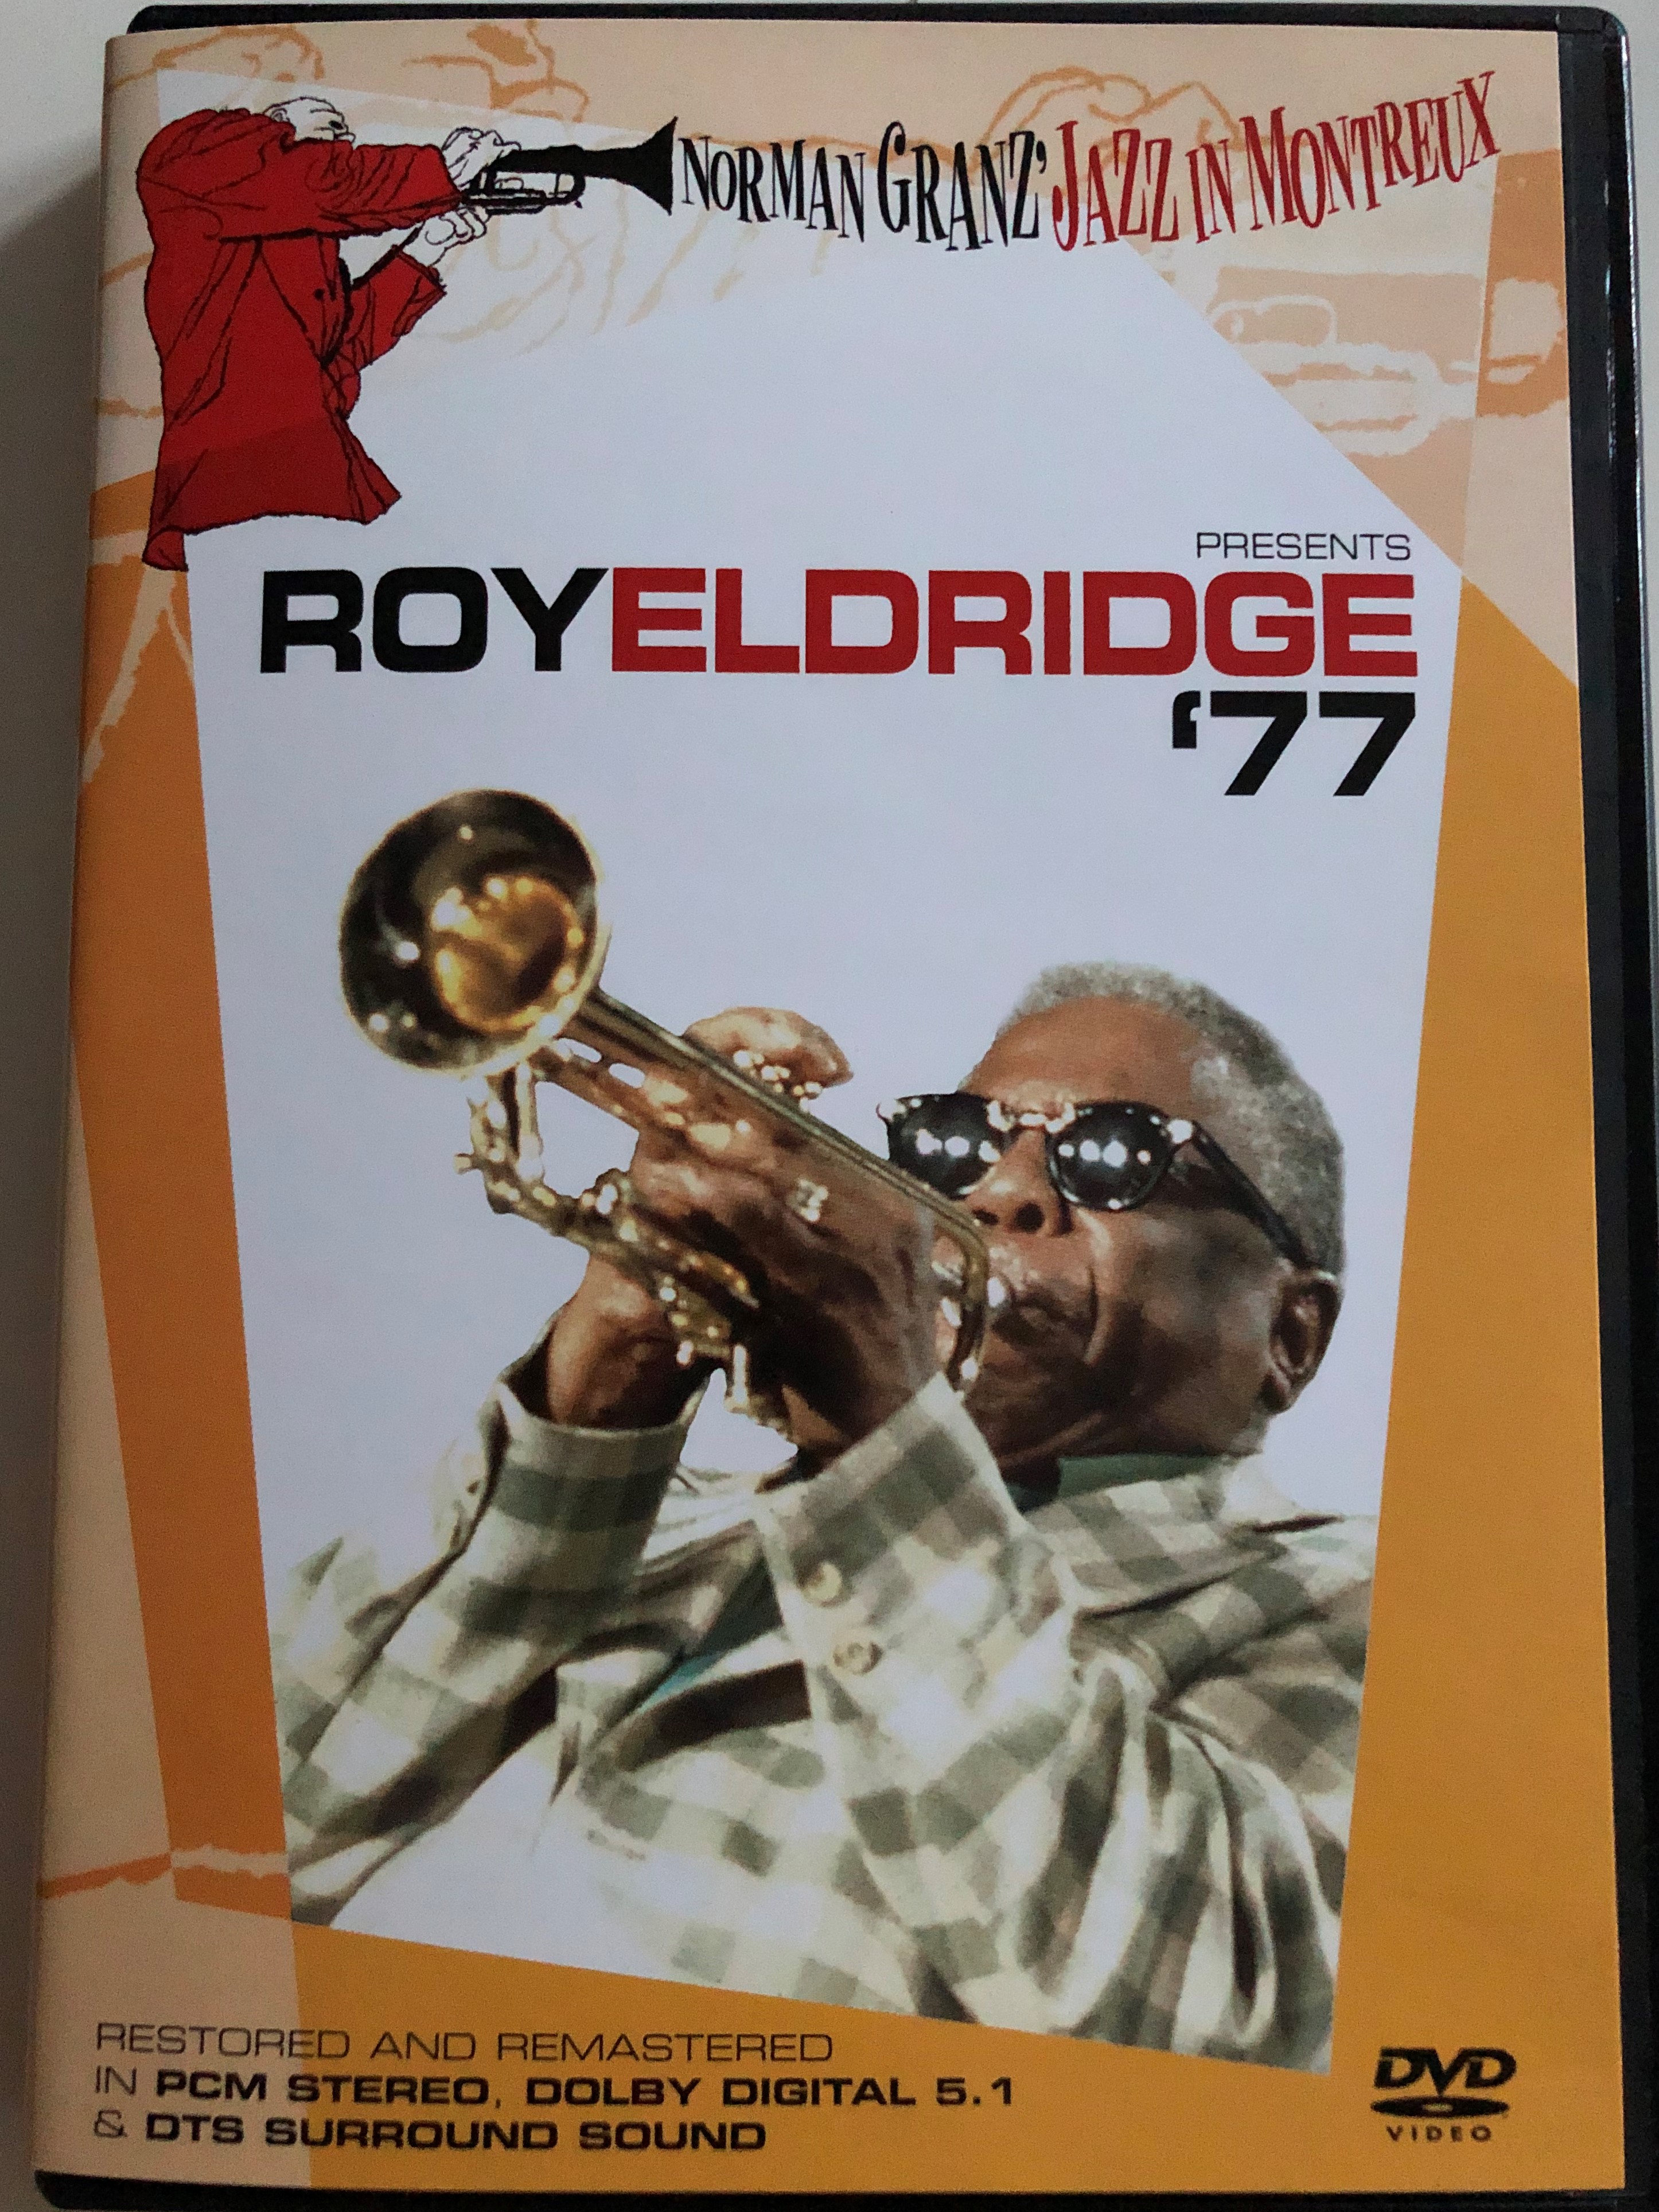 roy-eldridge-77-dvd-2004-norman-granz-jazz-in-montreux-between-the-devil-and-the-deep-blue-sea-blues-i-surrender-dear-perdido-restored-and-remastered-in-dolby-digital-5.1-dts-surround-1-.jpg